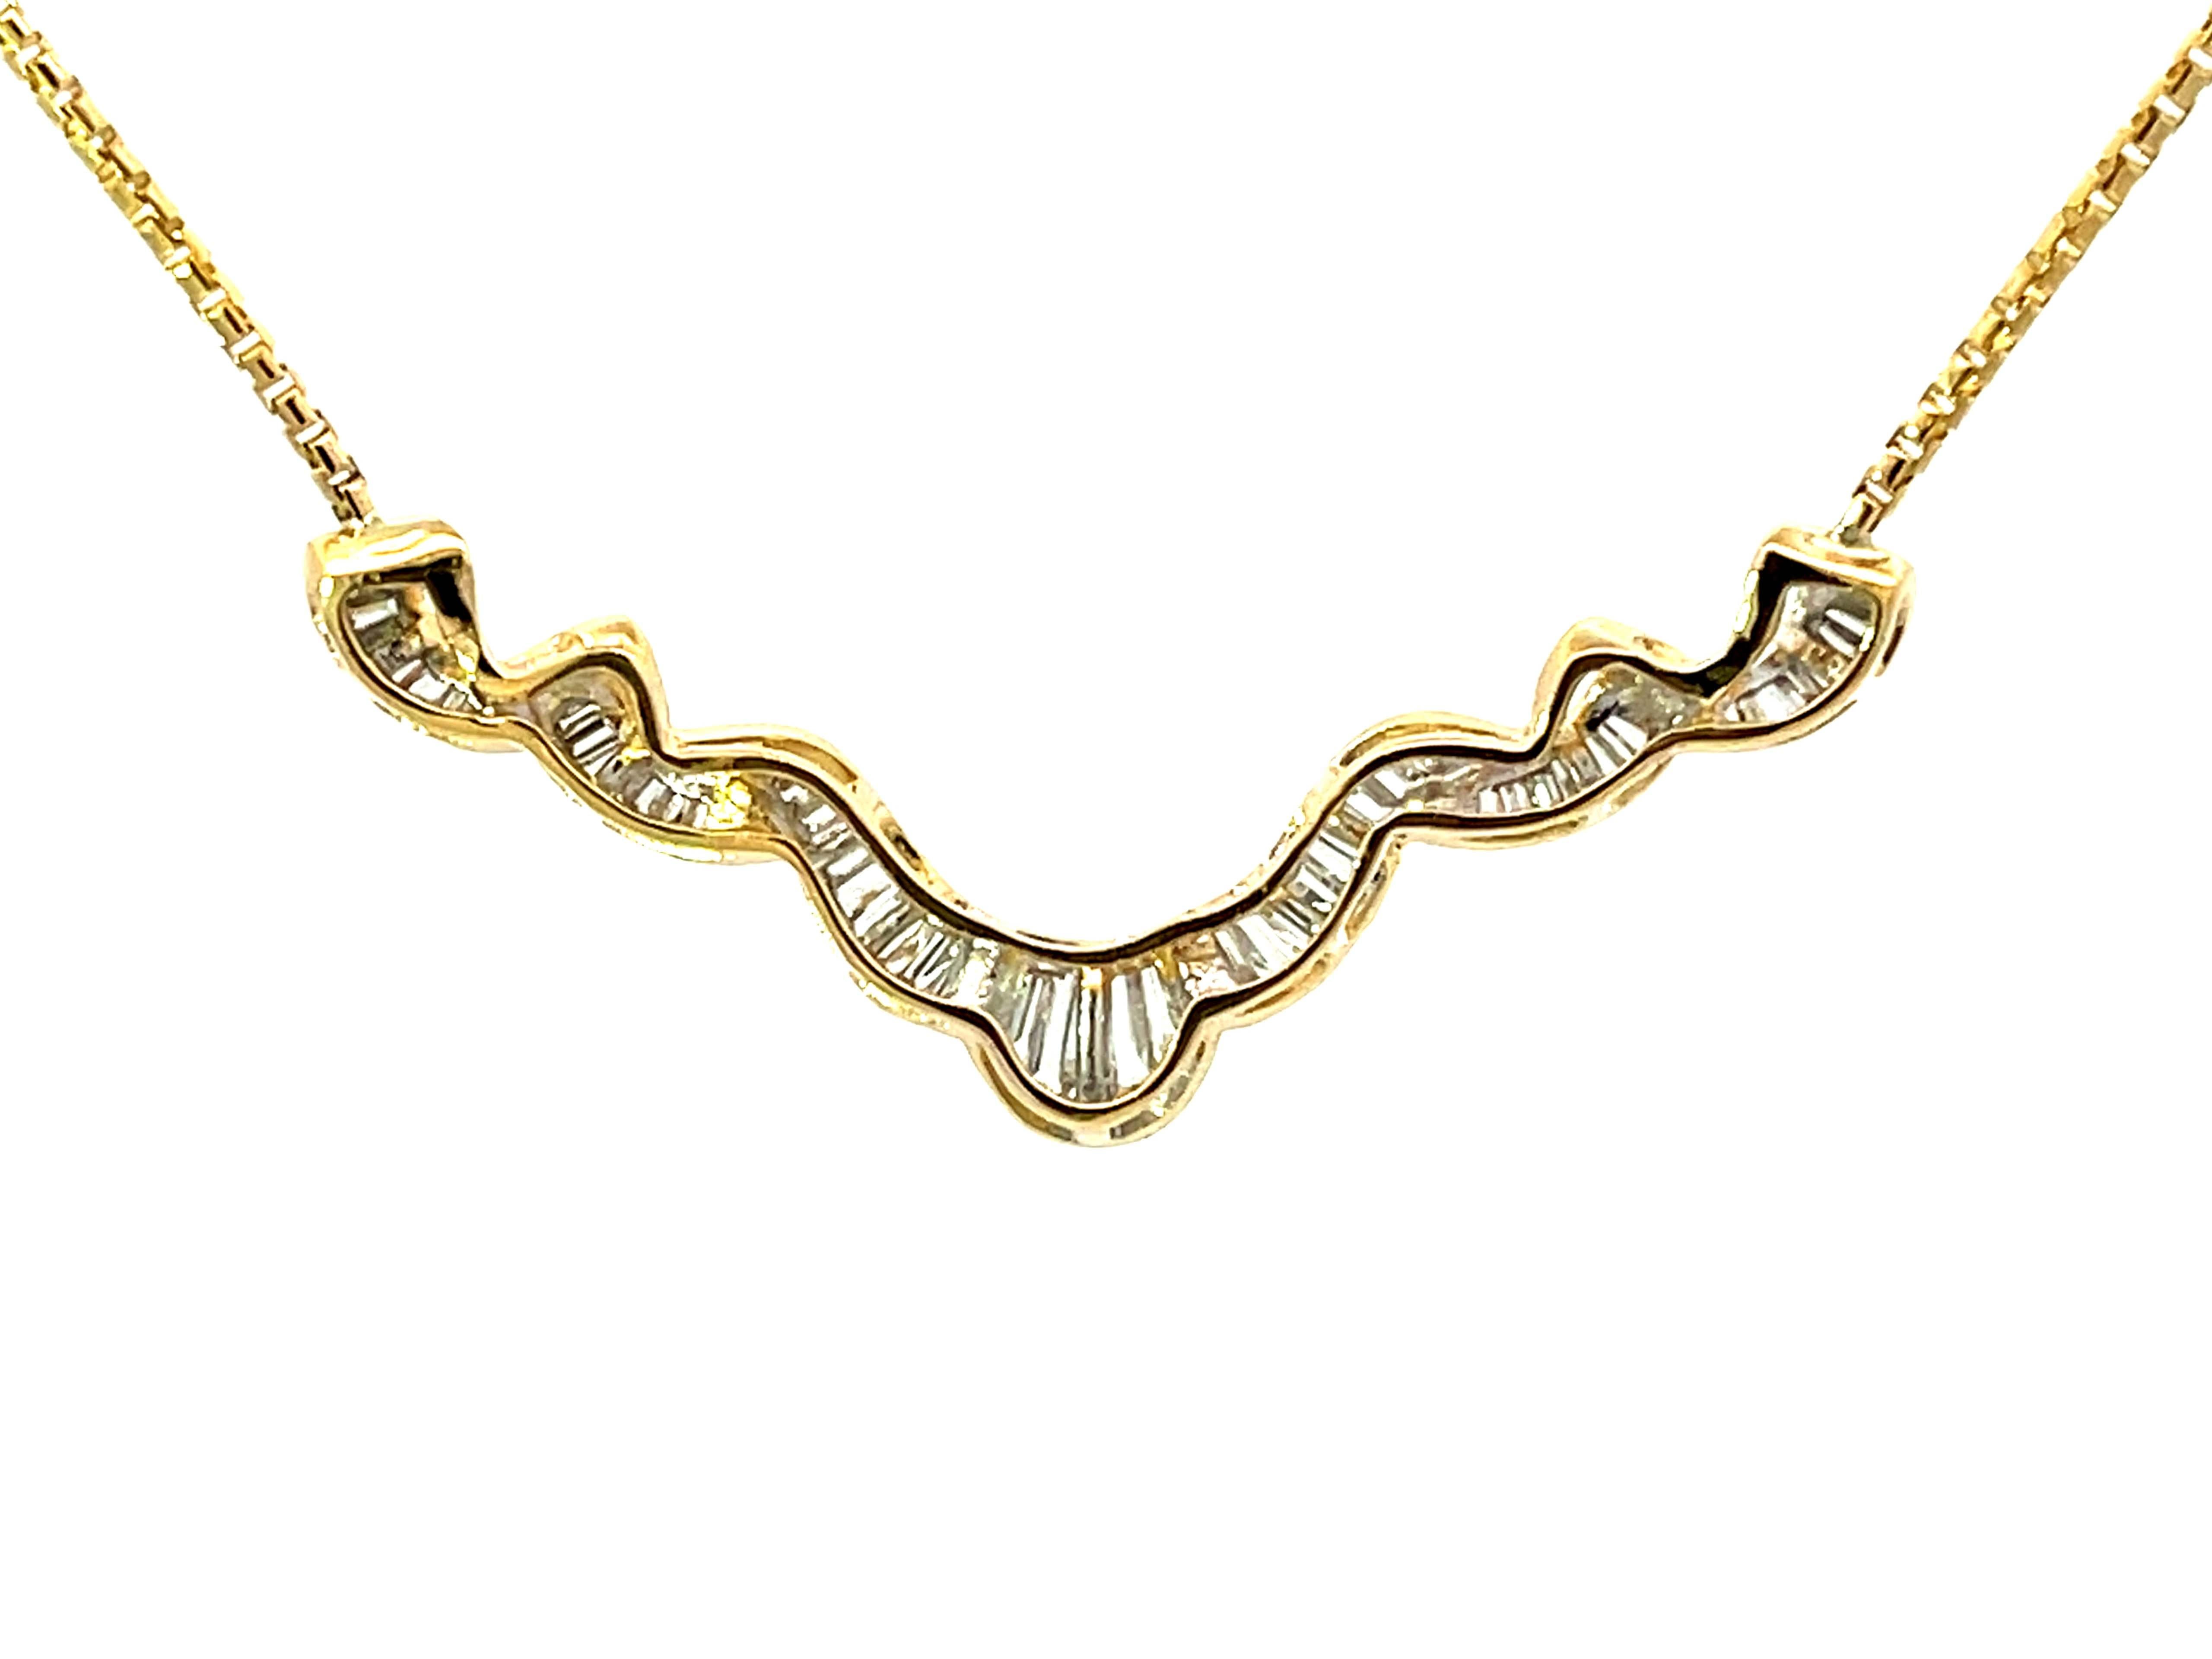 Solid 18k Yellow Gold Baguette Diamond Swirl Pendant Necklace For Sale 1